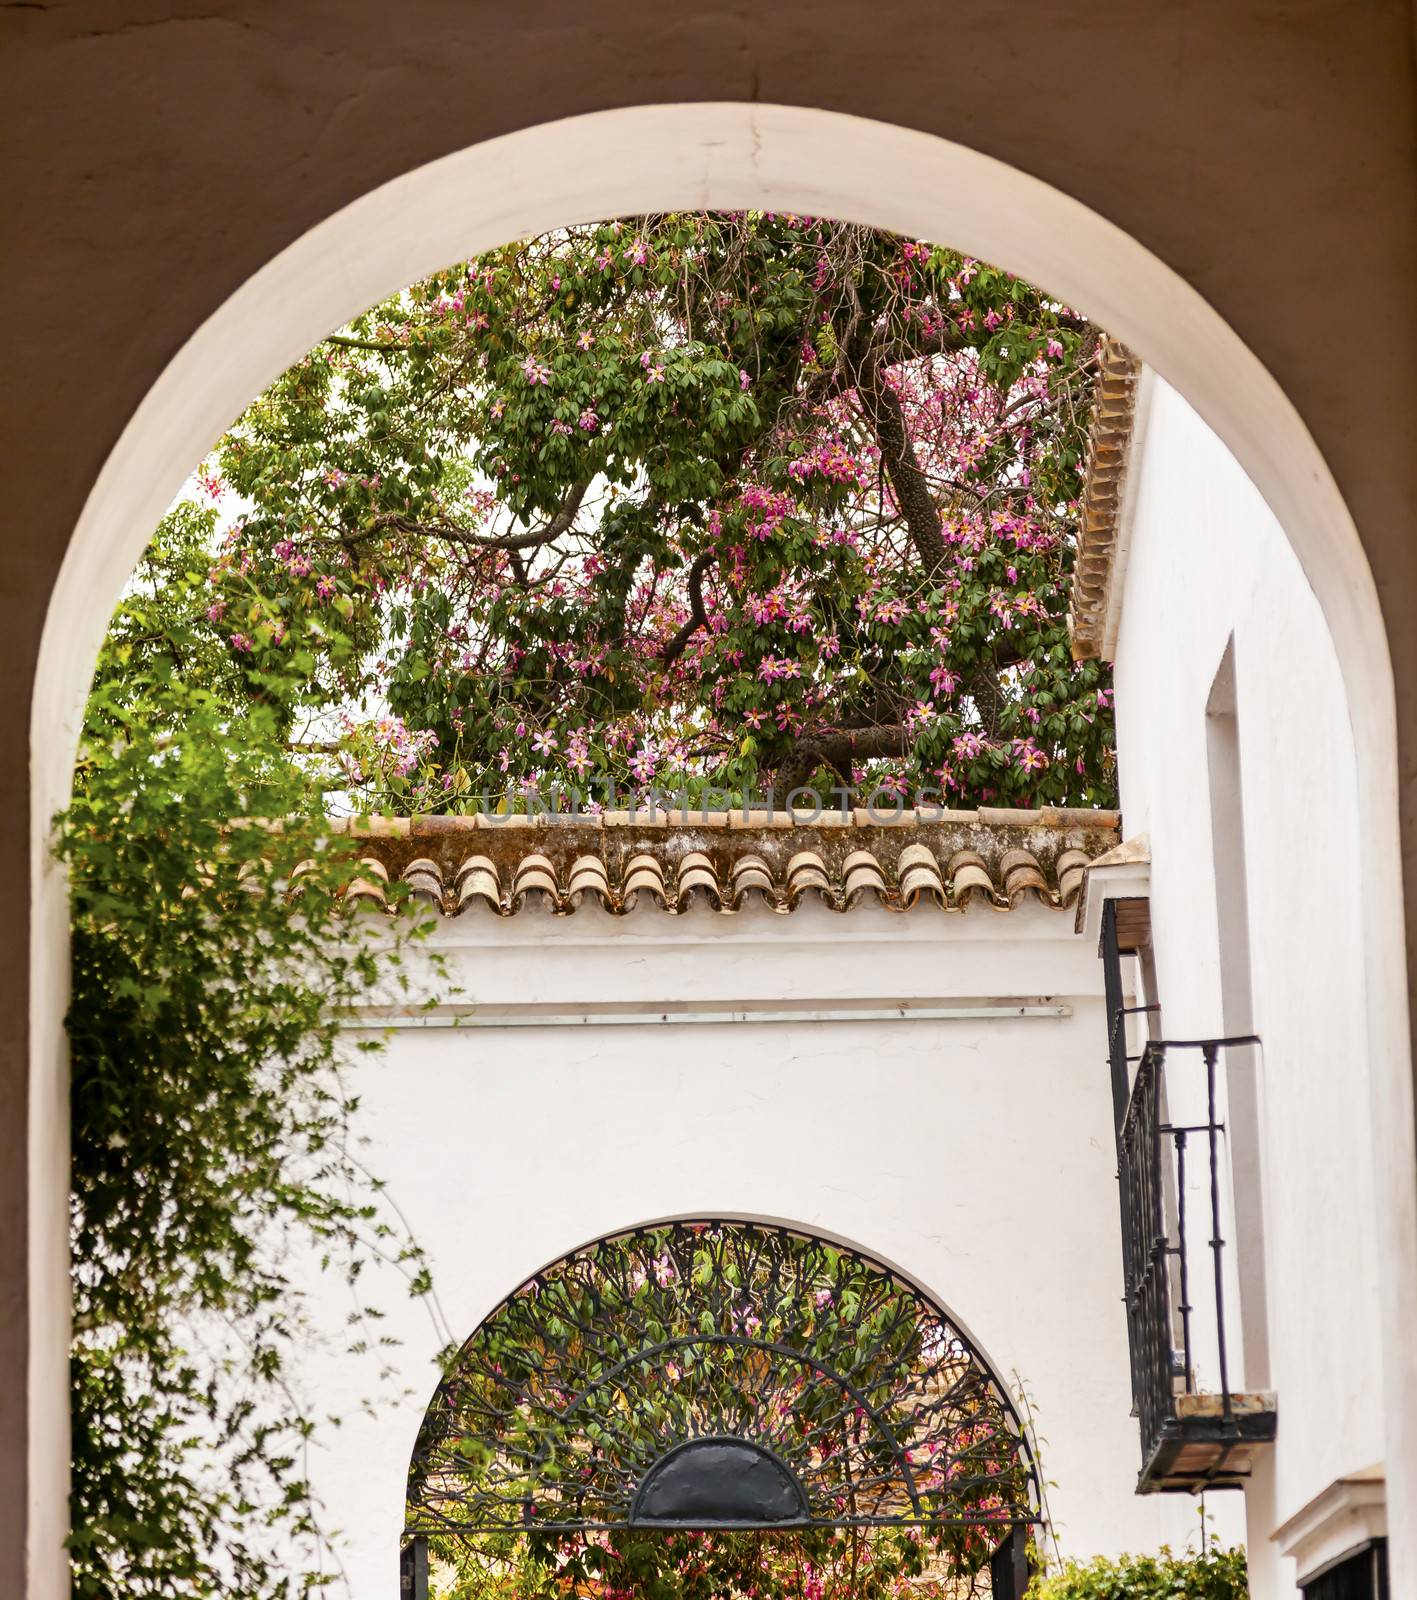 White Horseshoe Arches Pink Flowers Garden Ambassador Room Alcazar Royal Palace Seville Andalusia Spain.  Originally a Moorish Fort, oldest Royal Palace still in use in Europe. Built in the 1100s and rebuilt in the 1300s. 